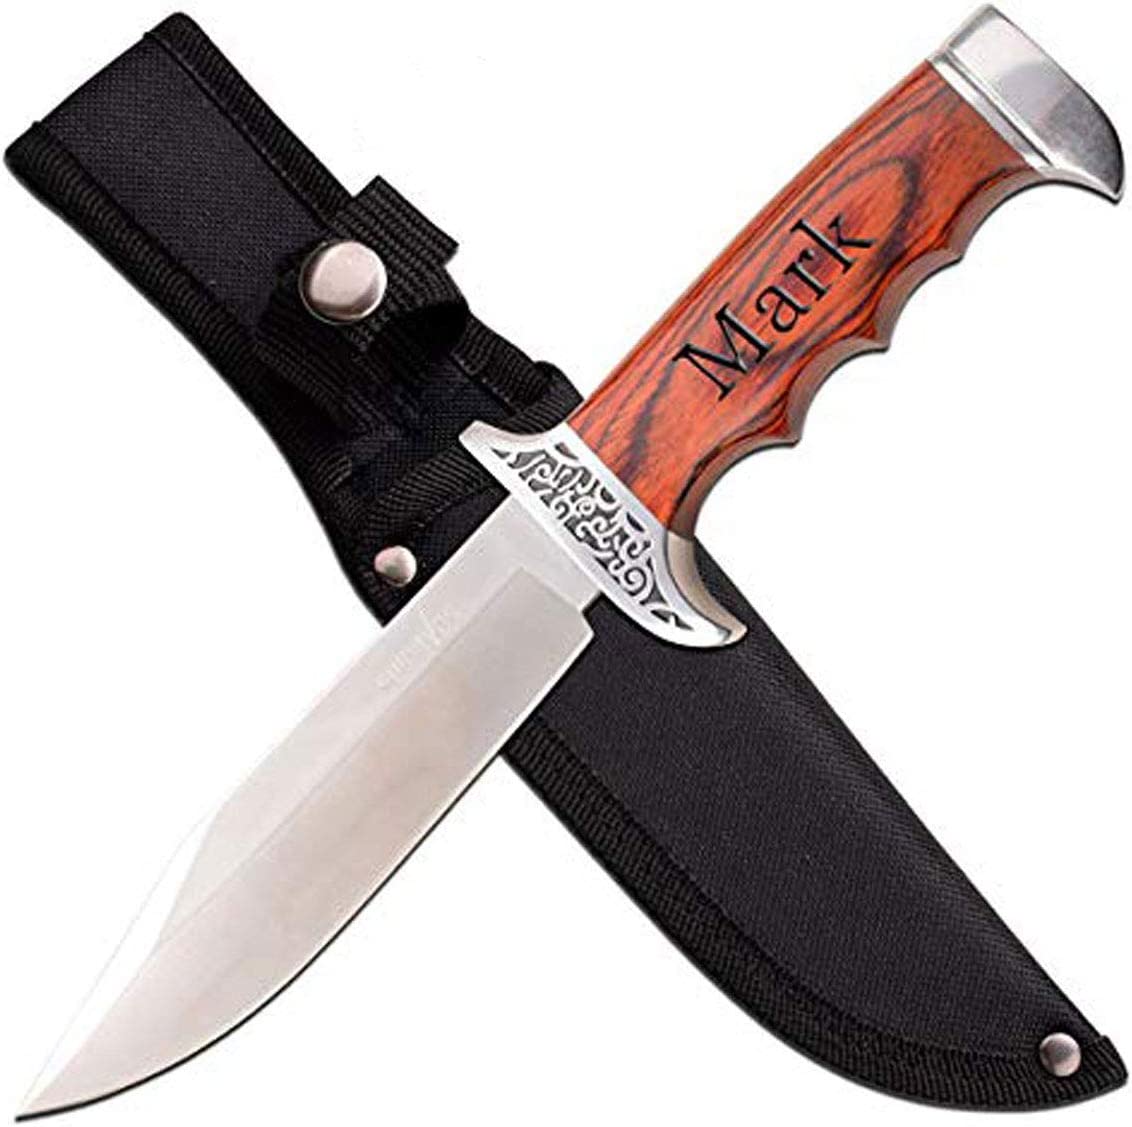 Elk Ridge - Personalized Tactical Pocket Knife with Free Engraving - HK-783, Pack 1